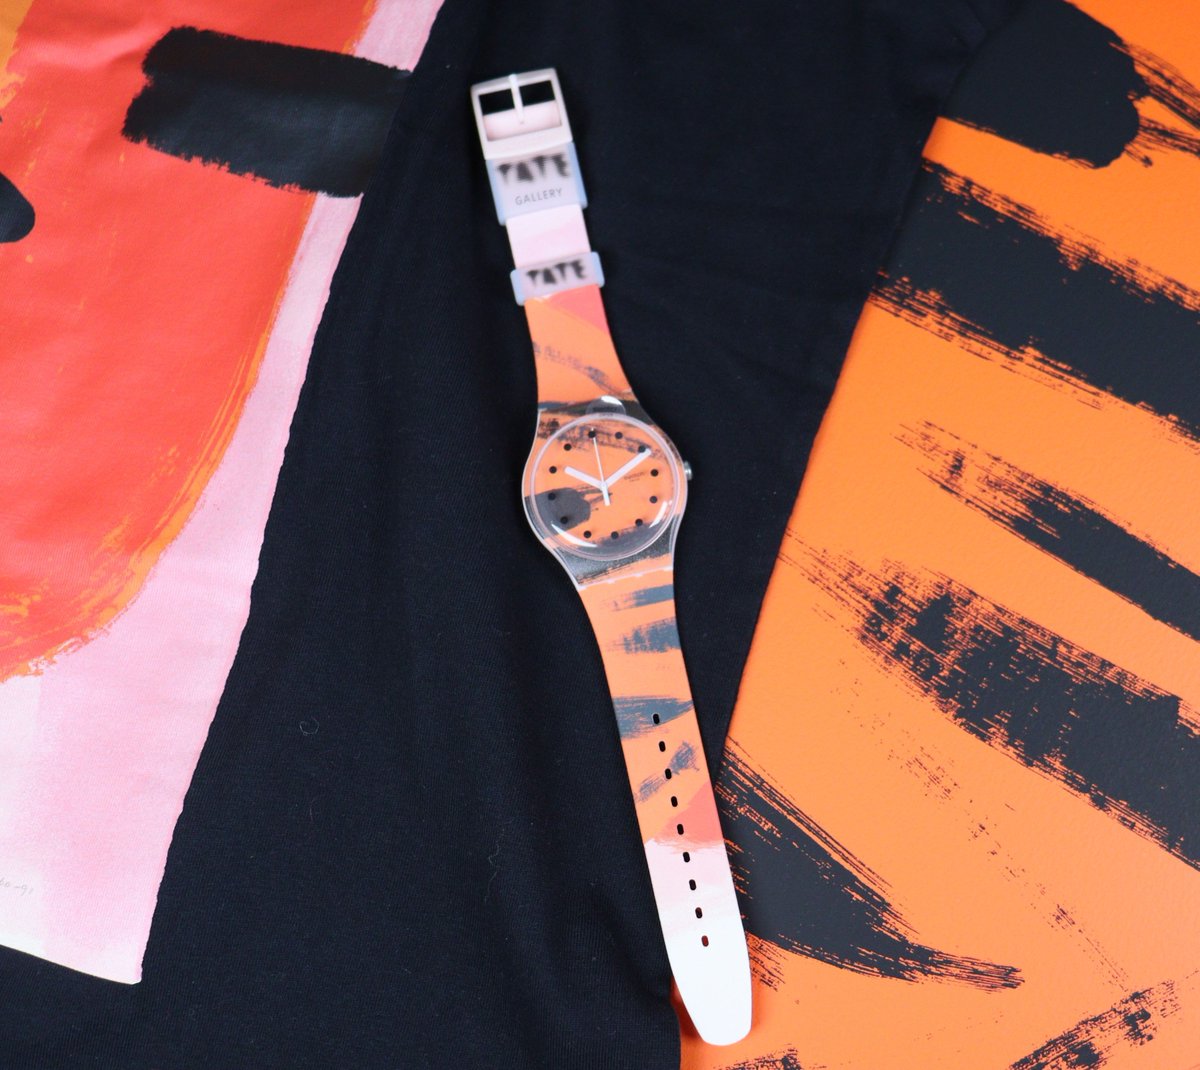 NOW AVAILABLE! - Today sees the launch of the WBG Tate X Swatch watch, featuring WBG's 1991 print Orange and Red on Pink. Along with WBG, the group of artists represented on the Tate Swatches are Bourgeois, Chagall, Leger, Matisse, Miro & Turner – excellent company!